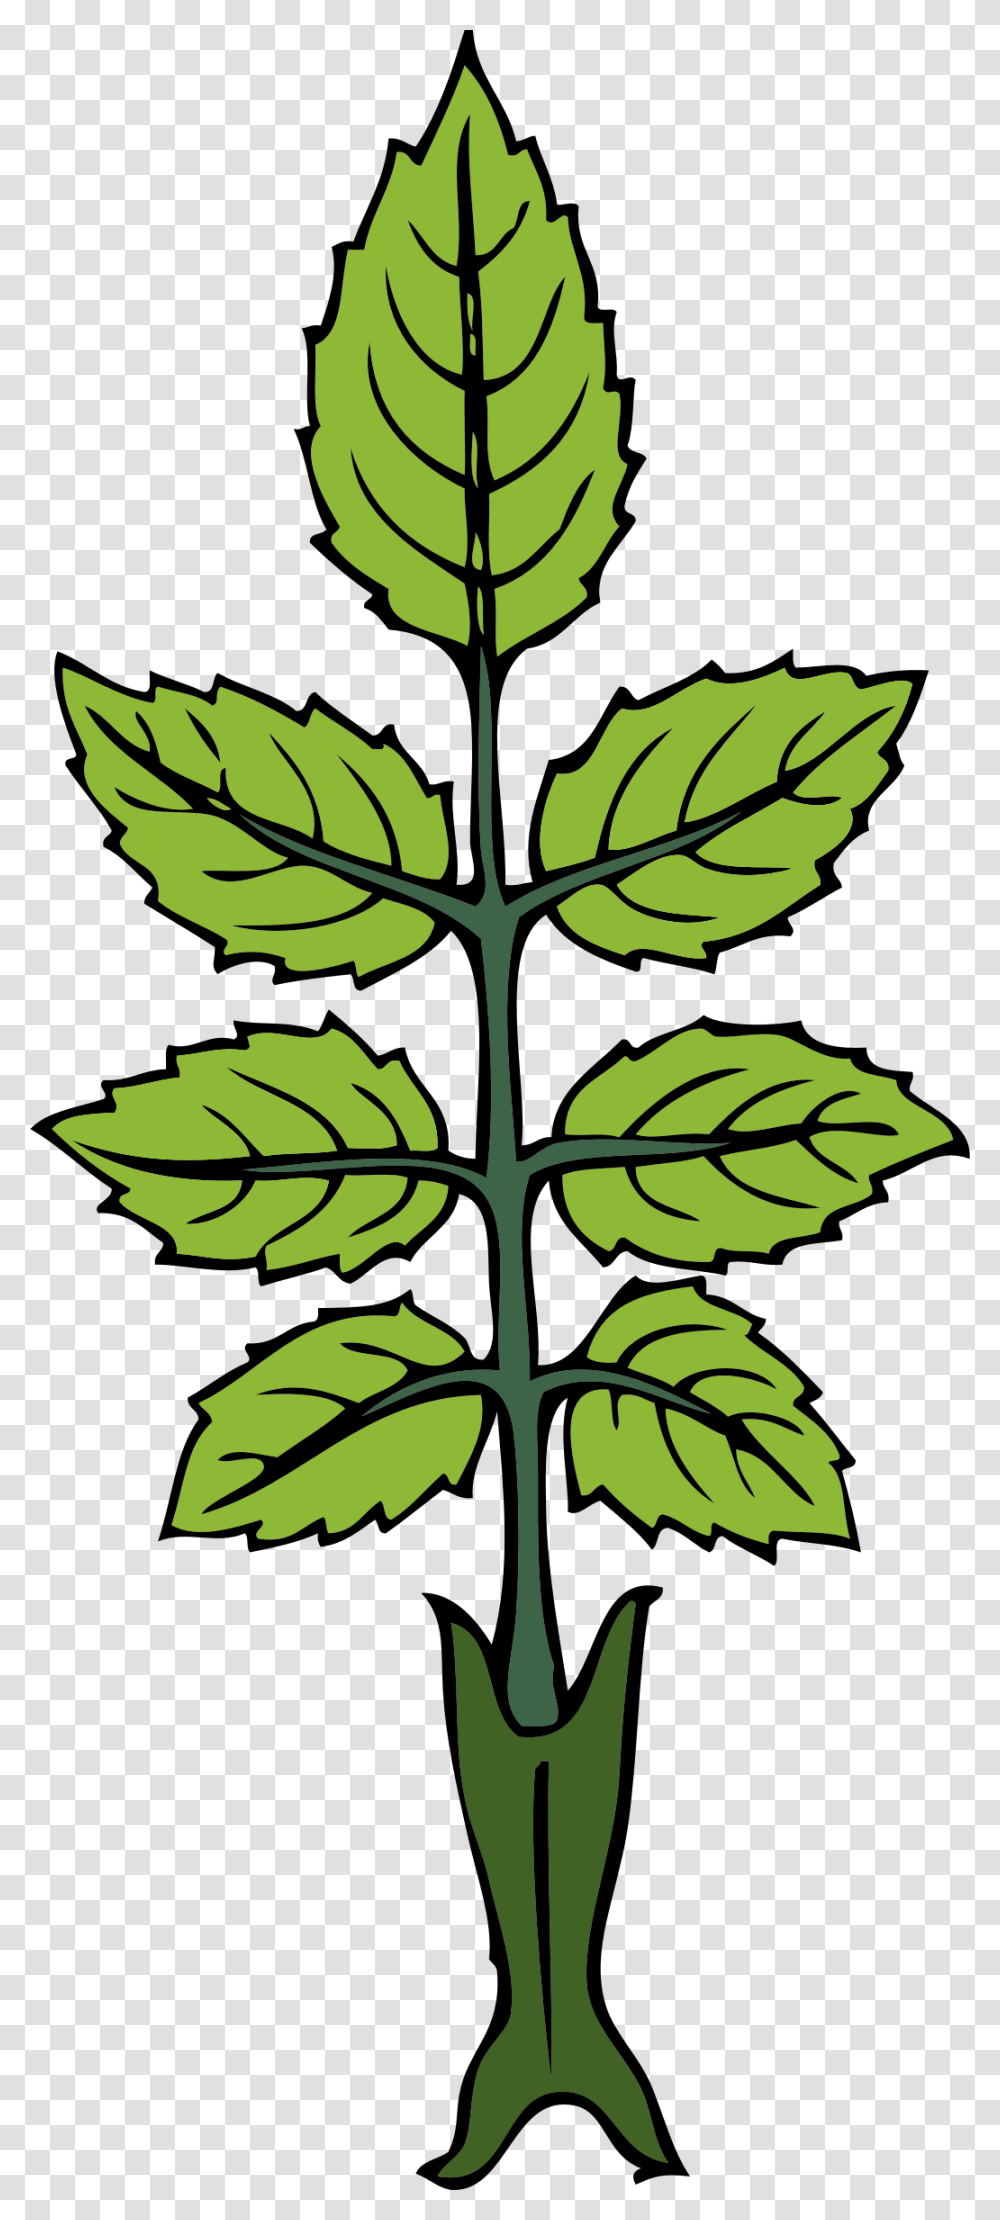 Free Vector Mint Branch Clip Art Draw A Mint Plant, Leaf, Green, Sunlight, Tree Transparent Png